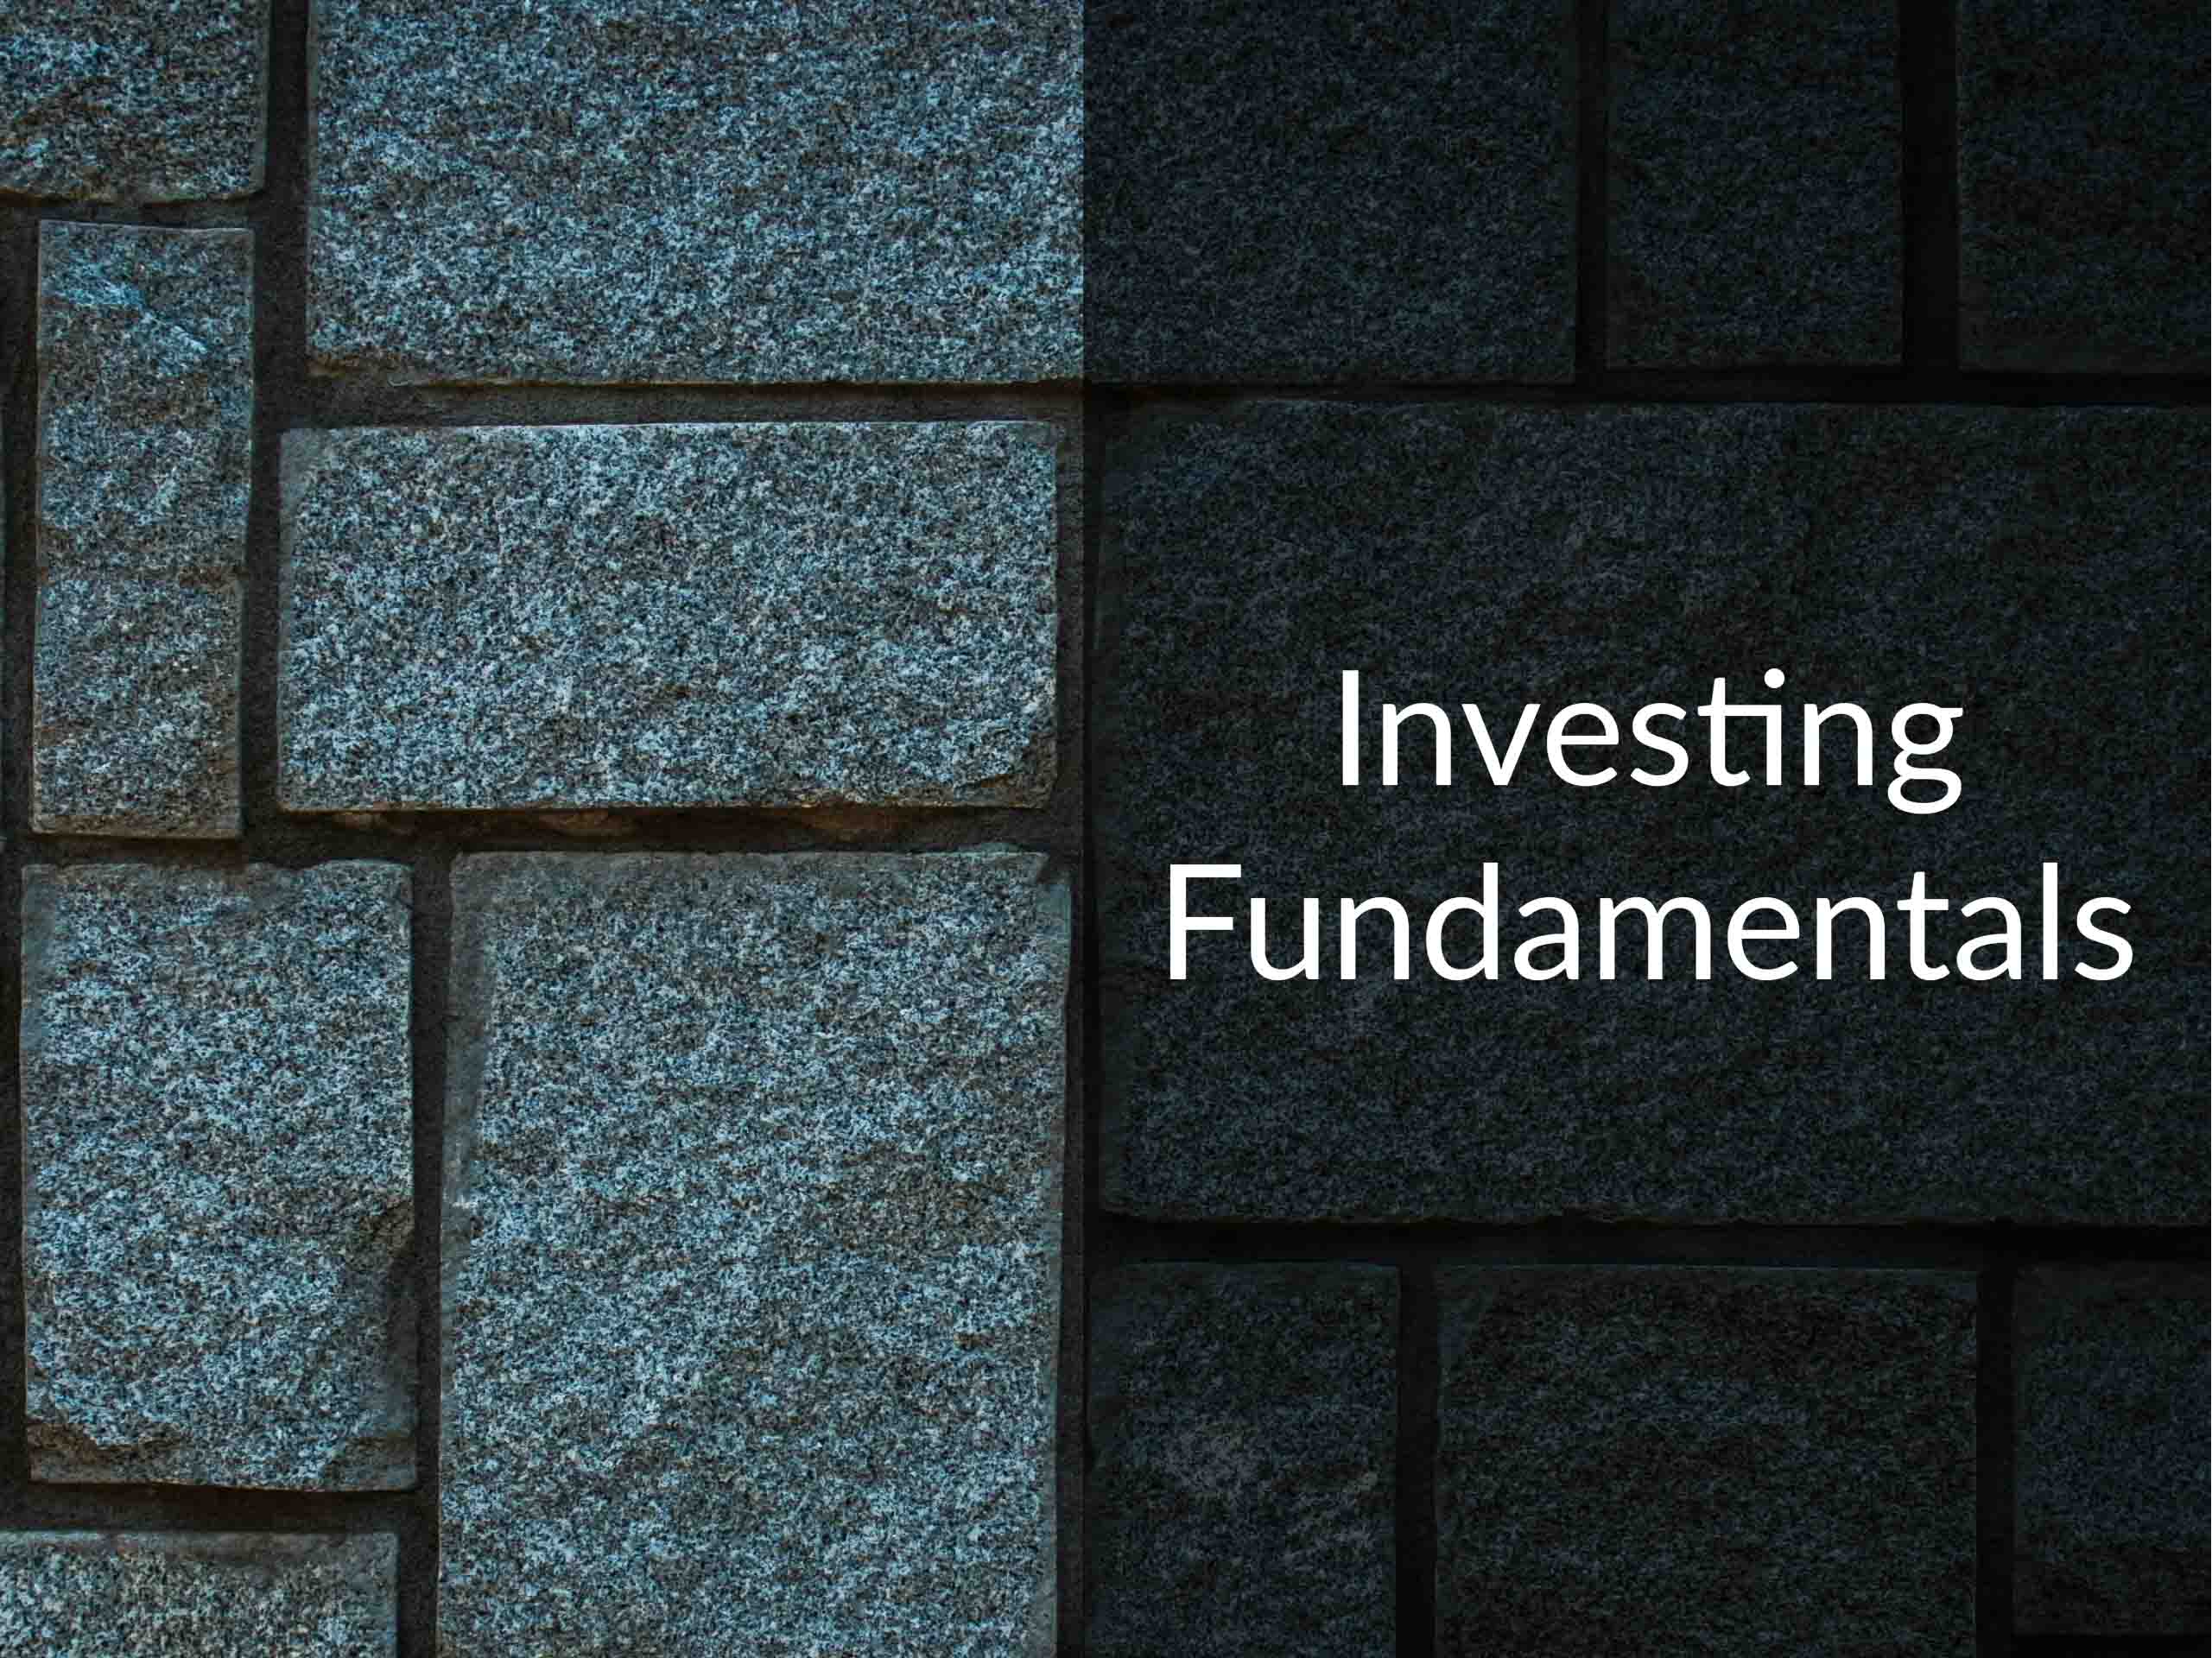 473: Investing Fundamentals and What Is Attractive Now